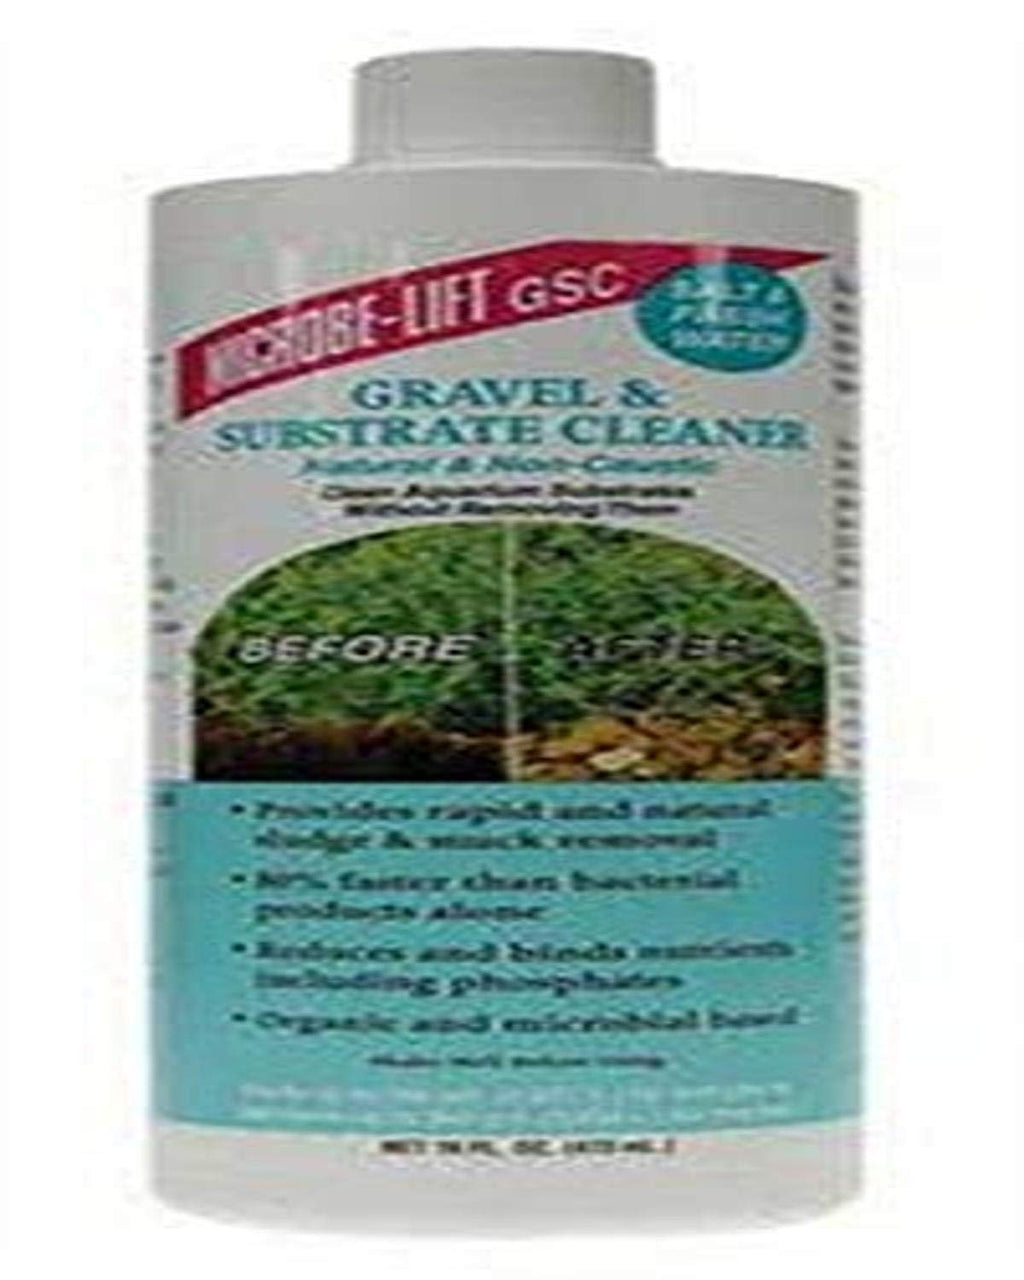 [Australia] - Microbe-Lift Gravel and Substrate Cleaner for Home Aquariums, 16-Ounce 